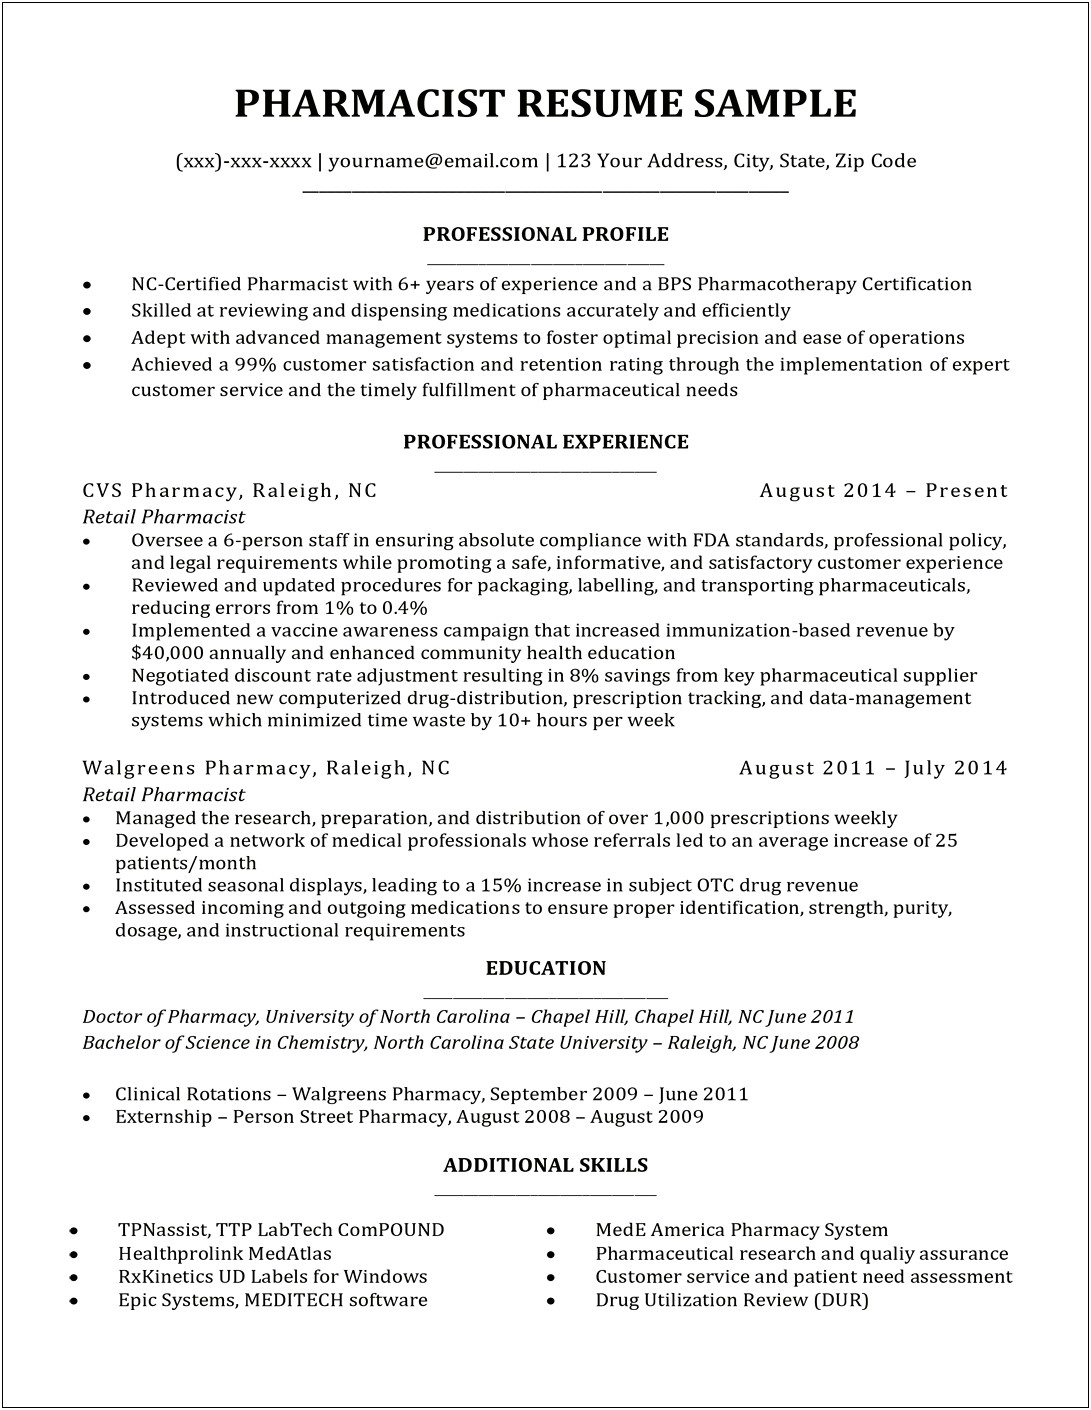 Pharmacy Student Resume Experience Examples